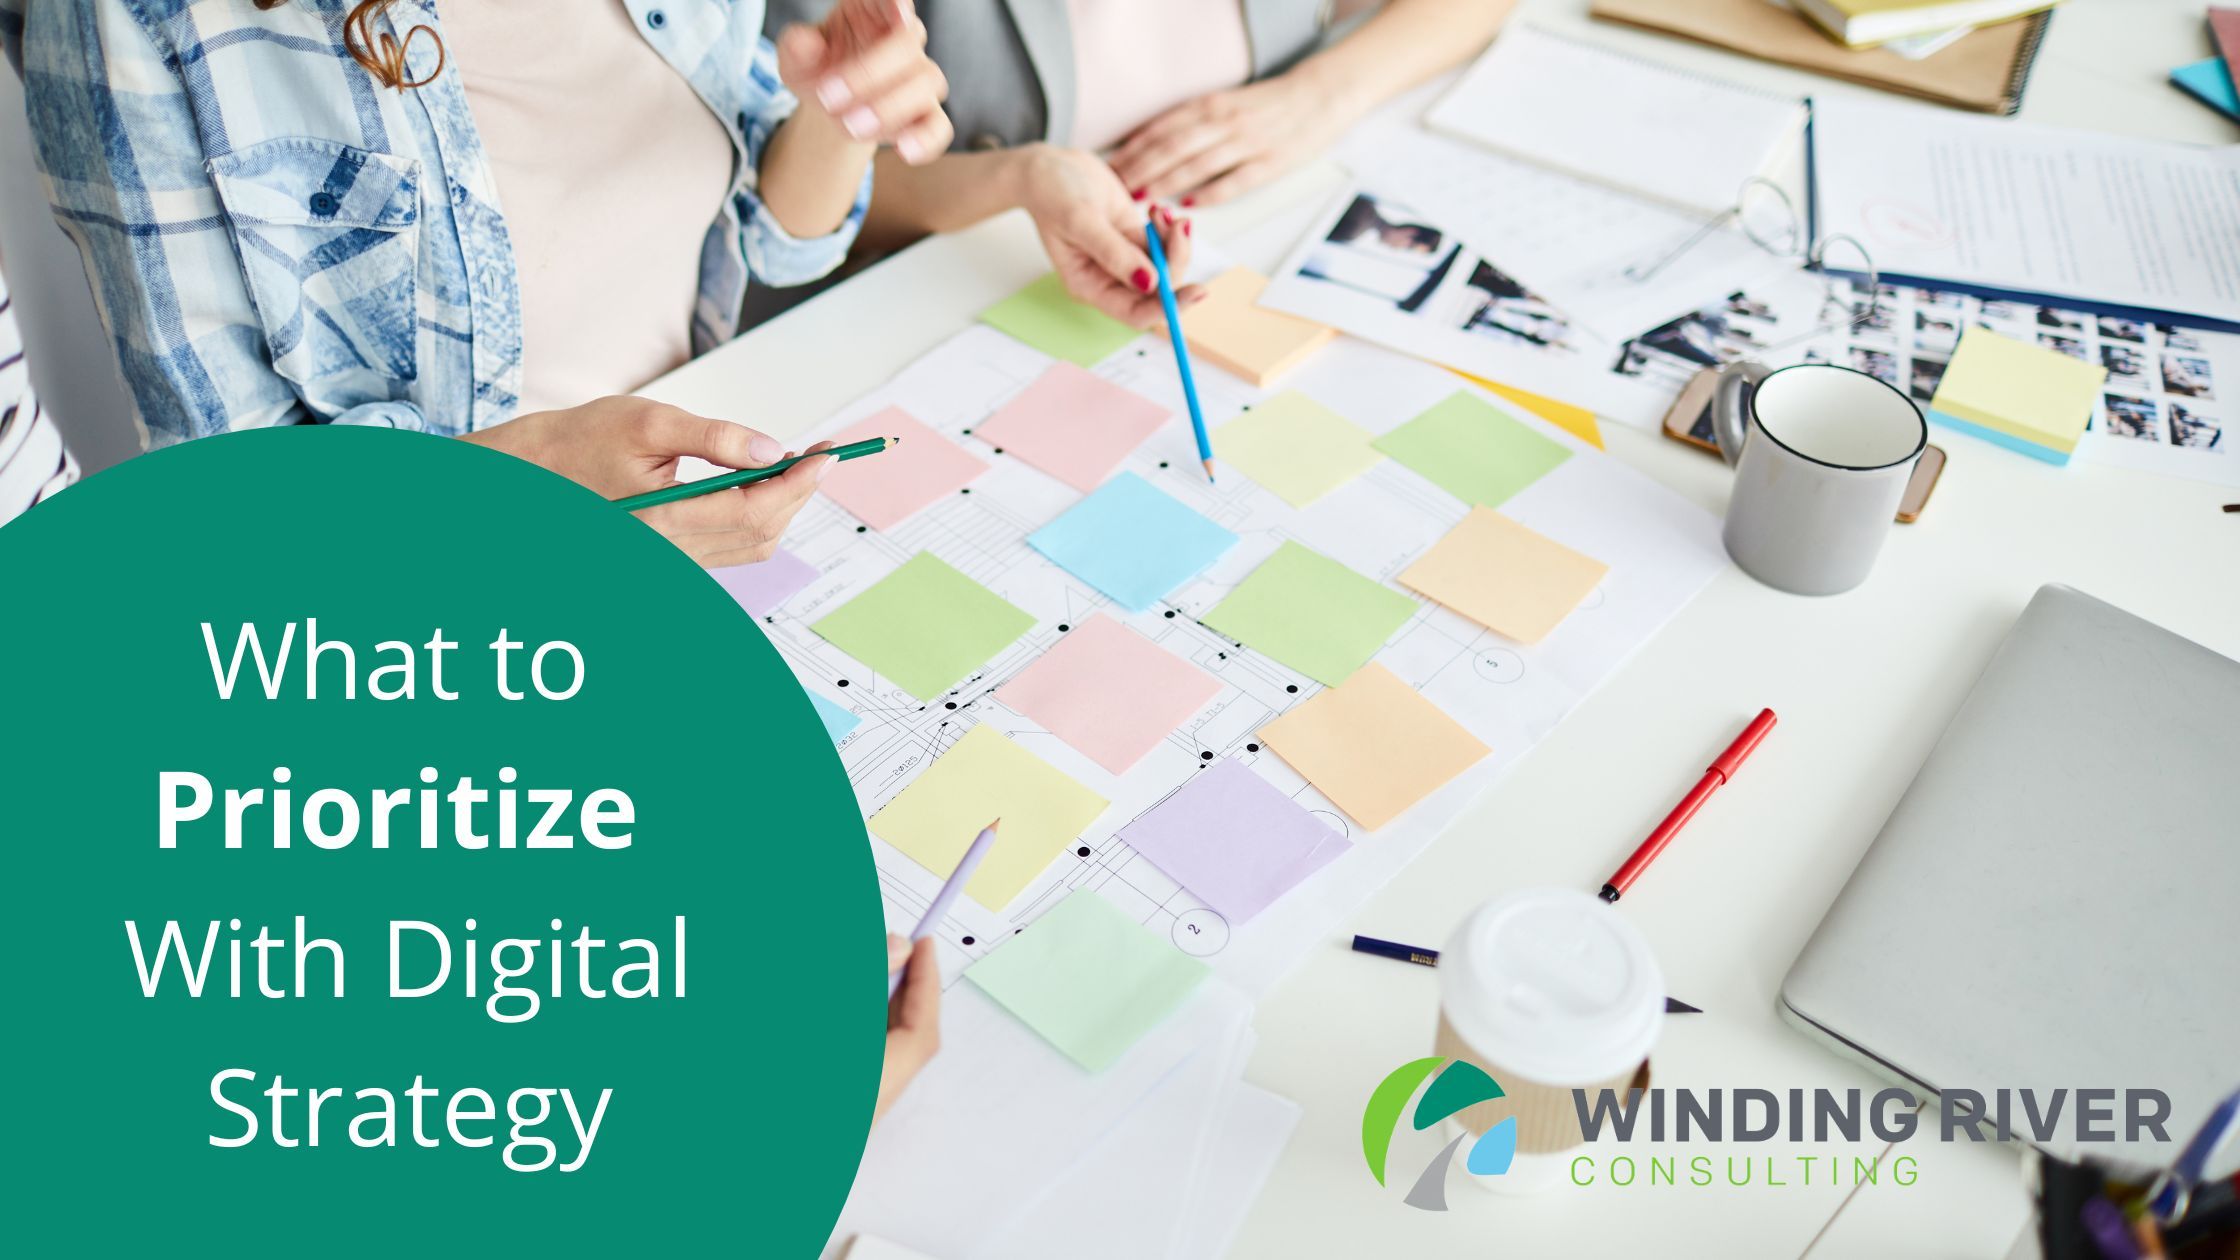 What to Prioritize With Digital Strategy